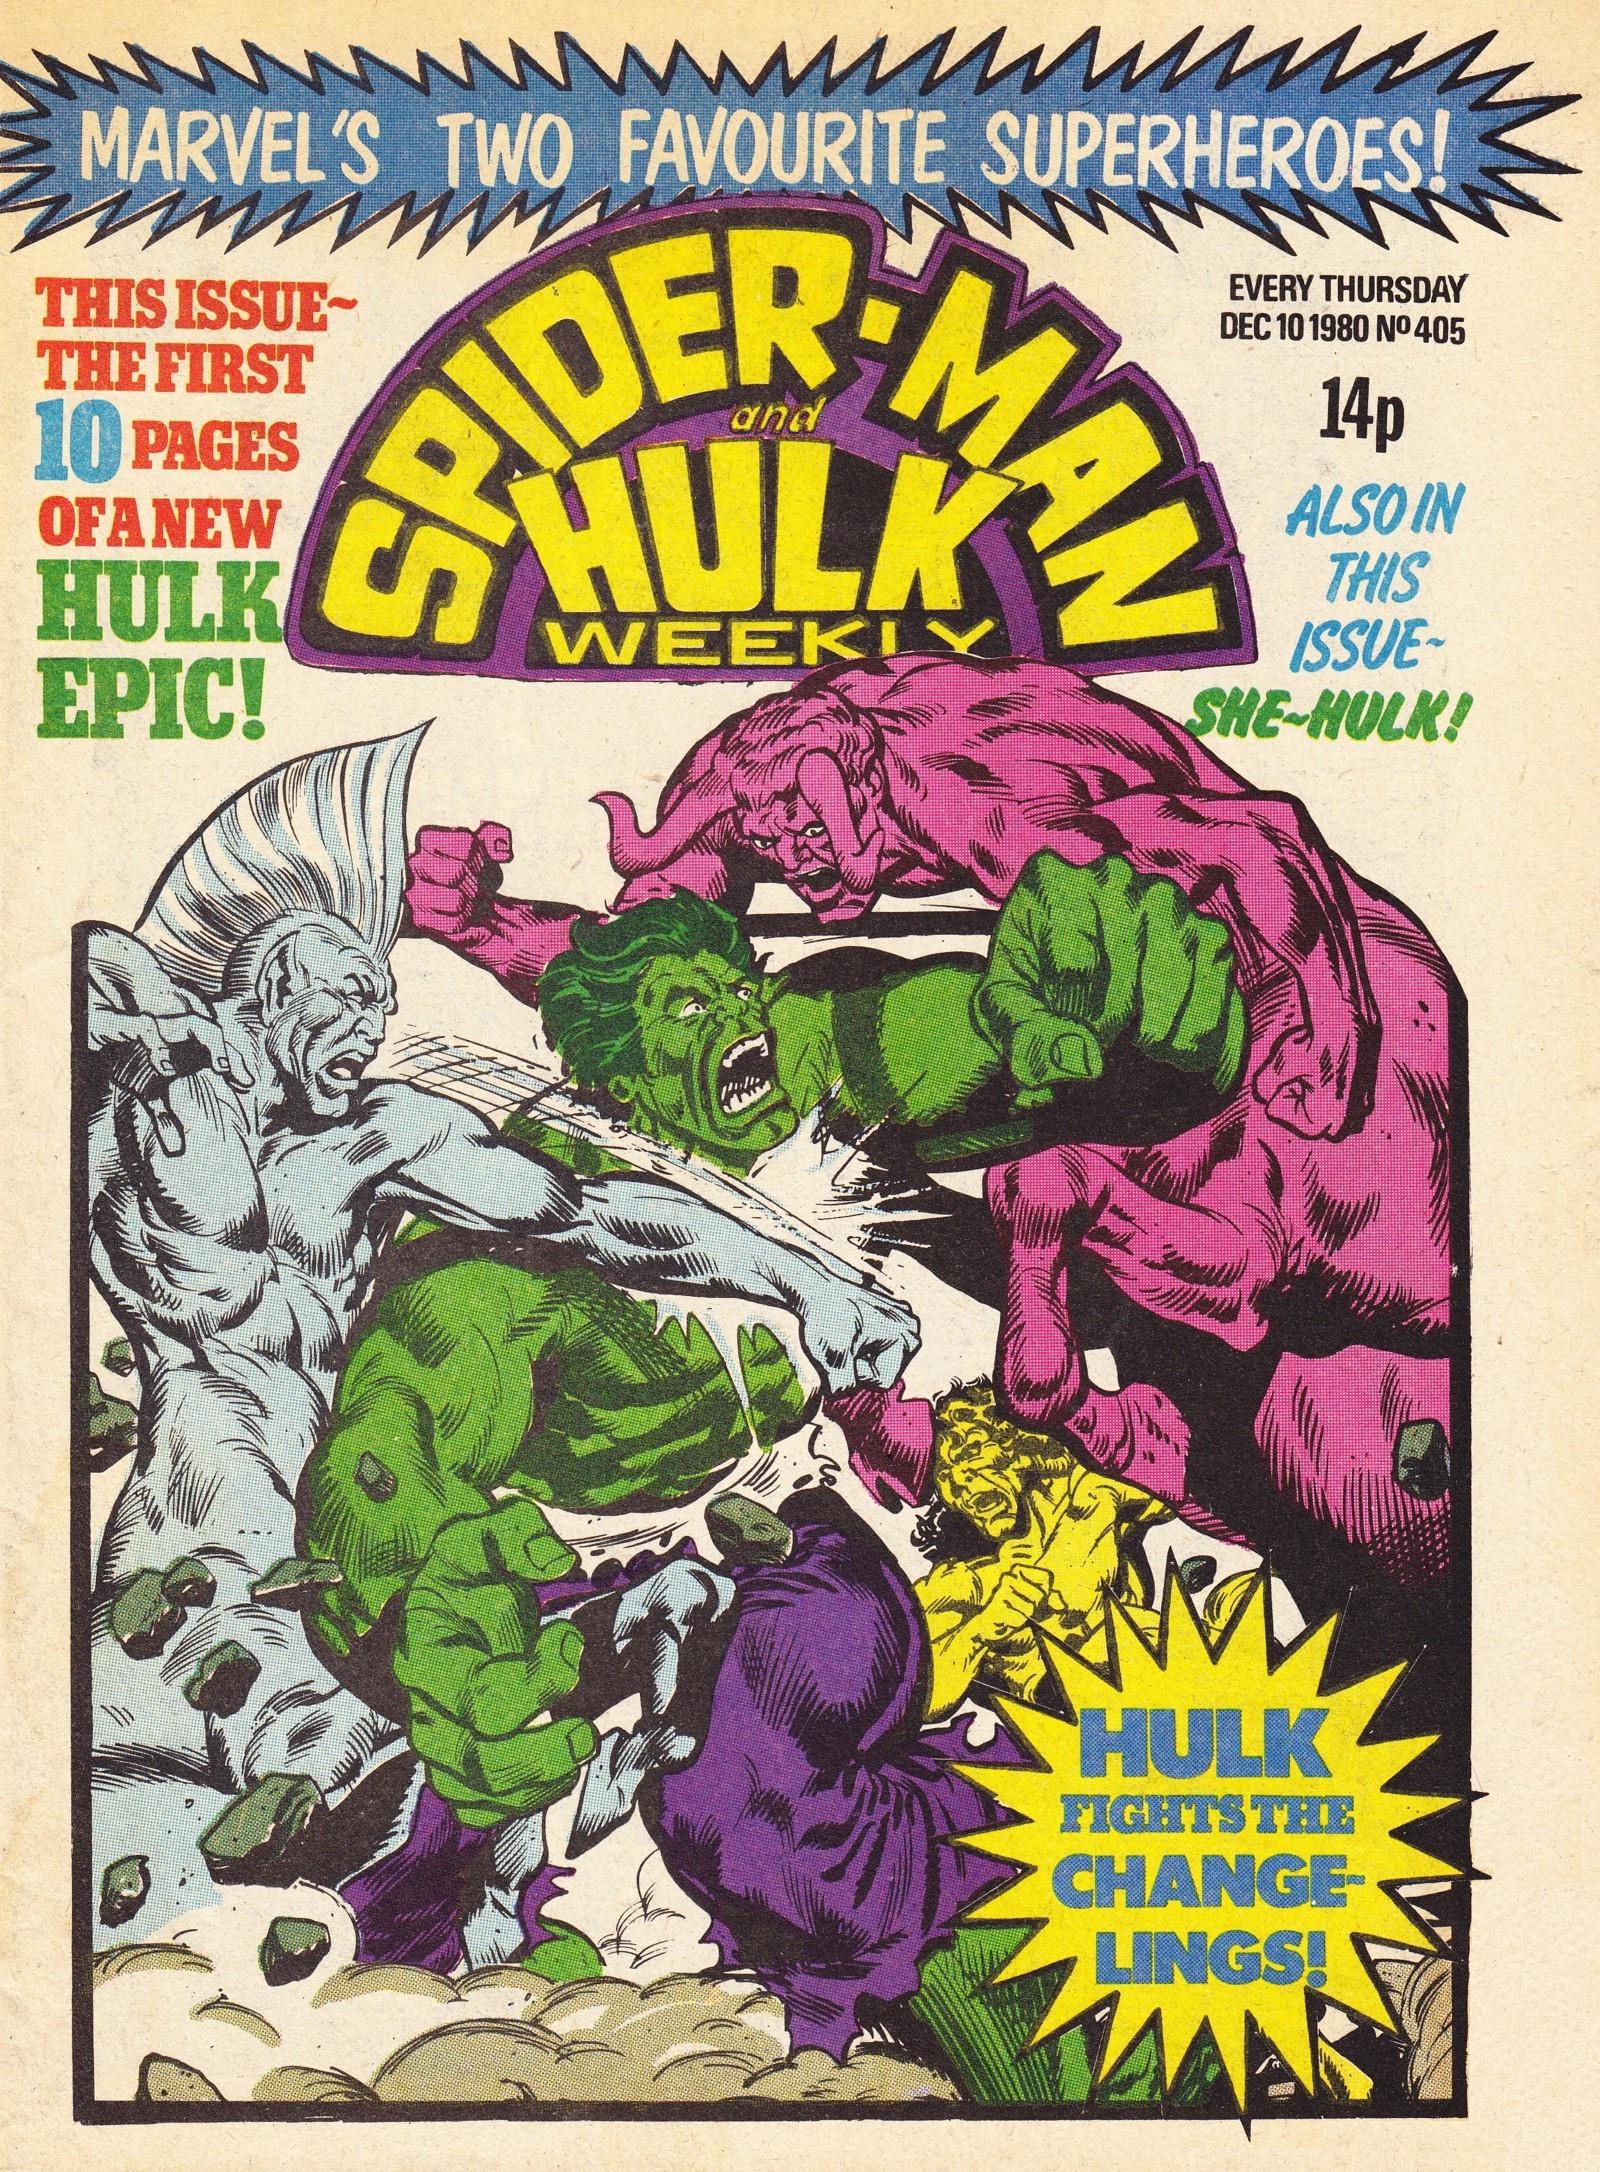 Read online Spider-Man and Hulk Weekly comic -  Issue #405 - 1